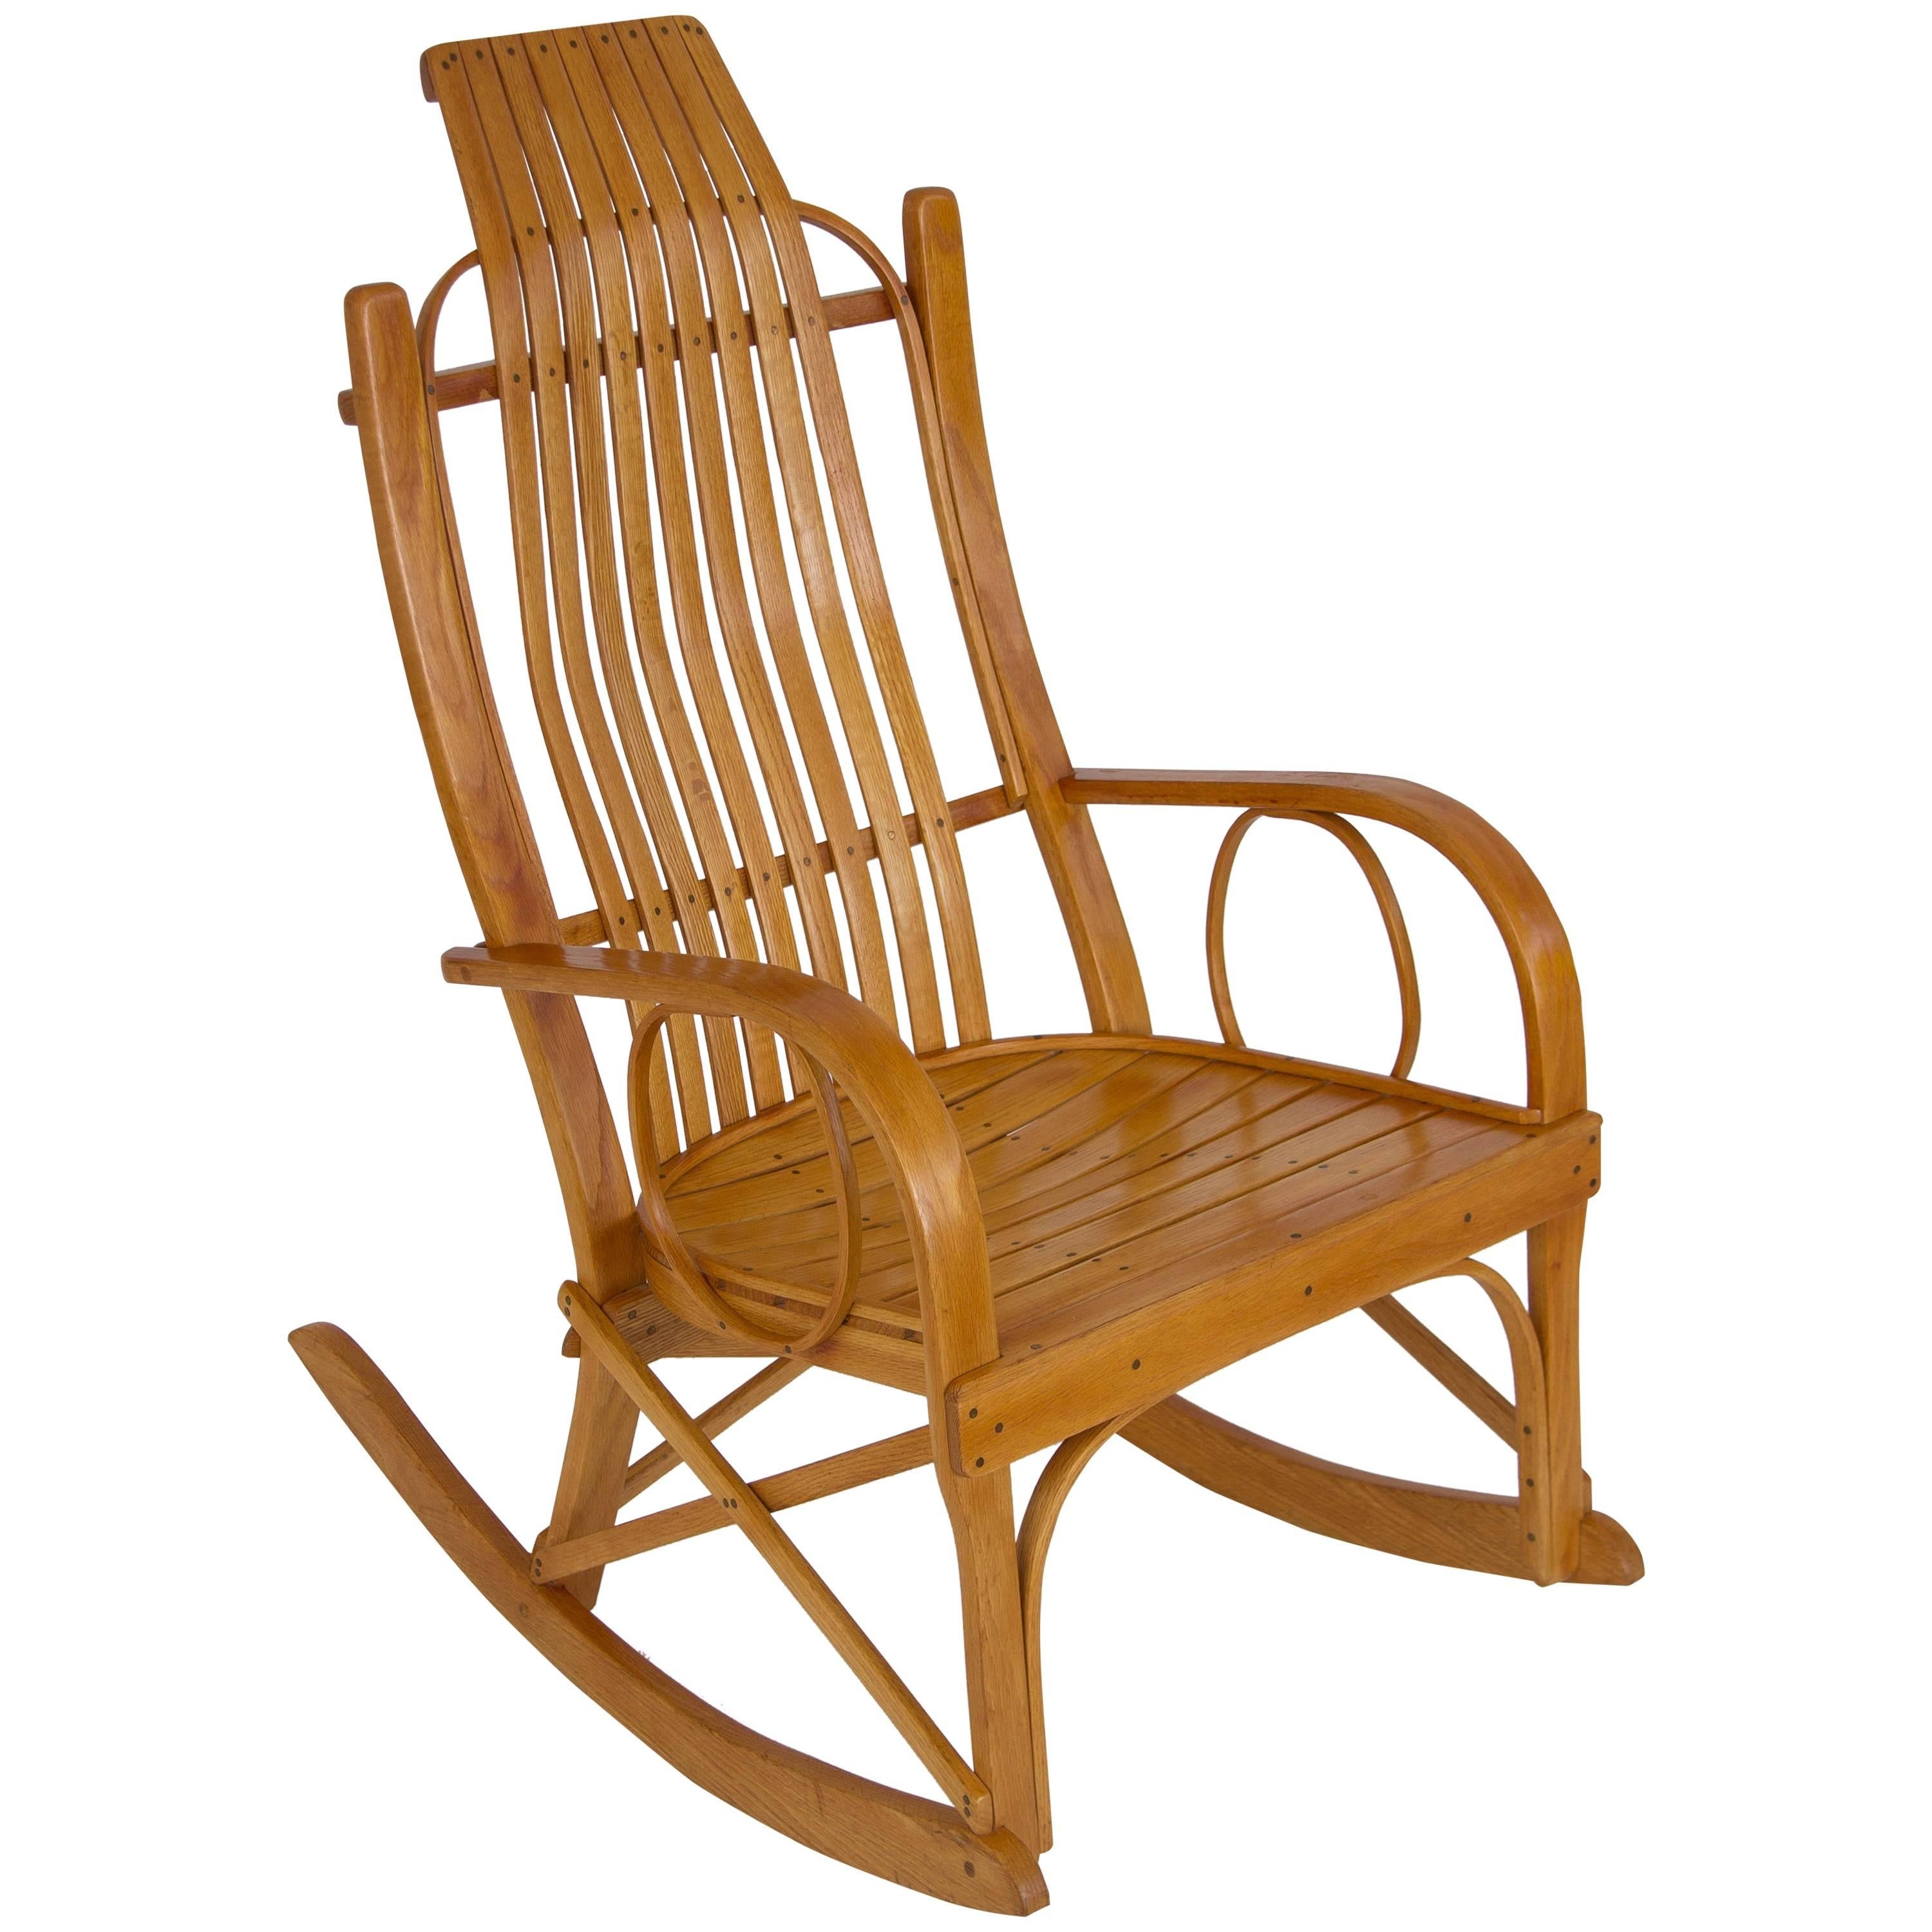 Bentwood Adirondack Rocking Chair with Slatted Seat